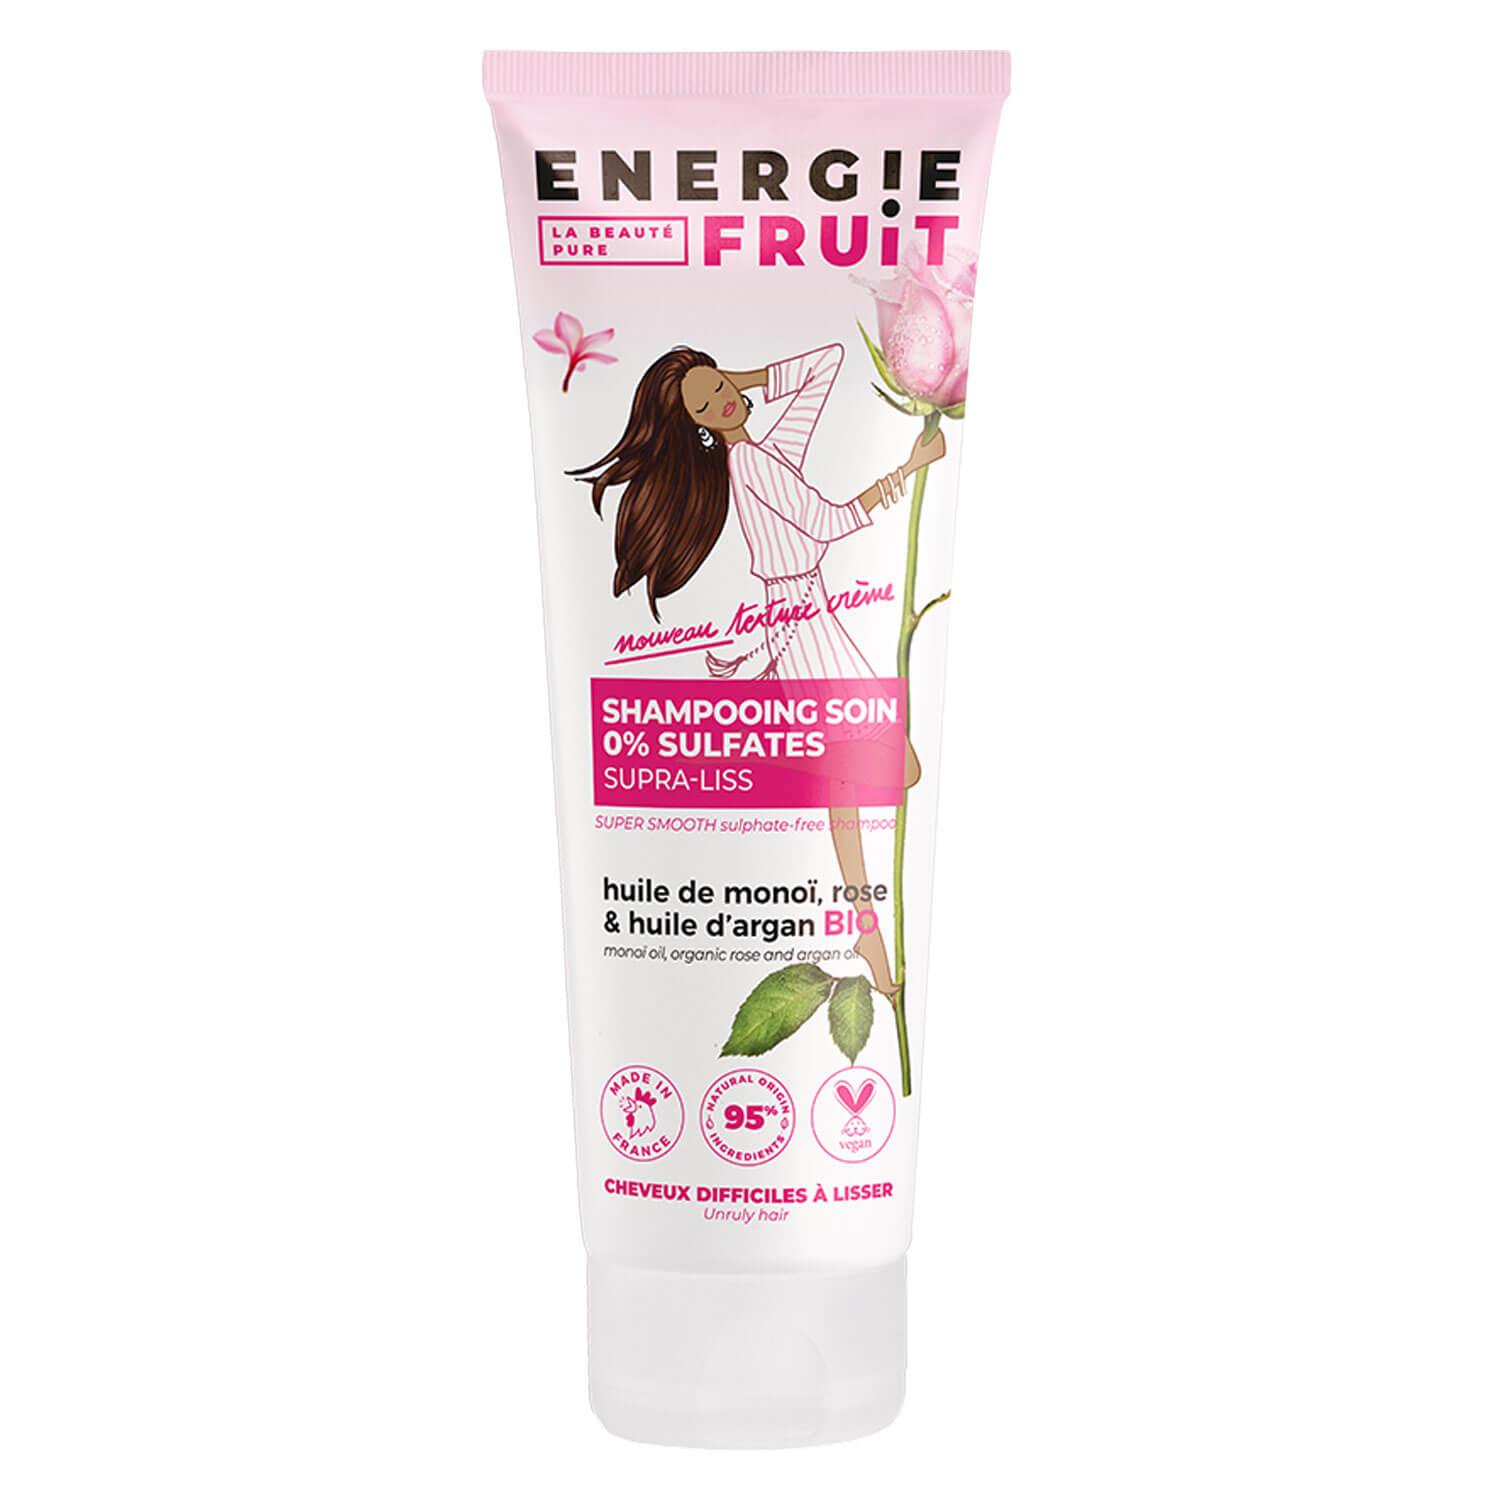 ENERGIE FRUIT - Super-Smooth Sulphate-Free Shampoo